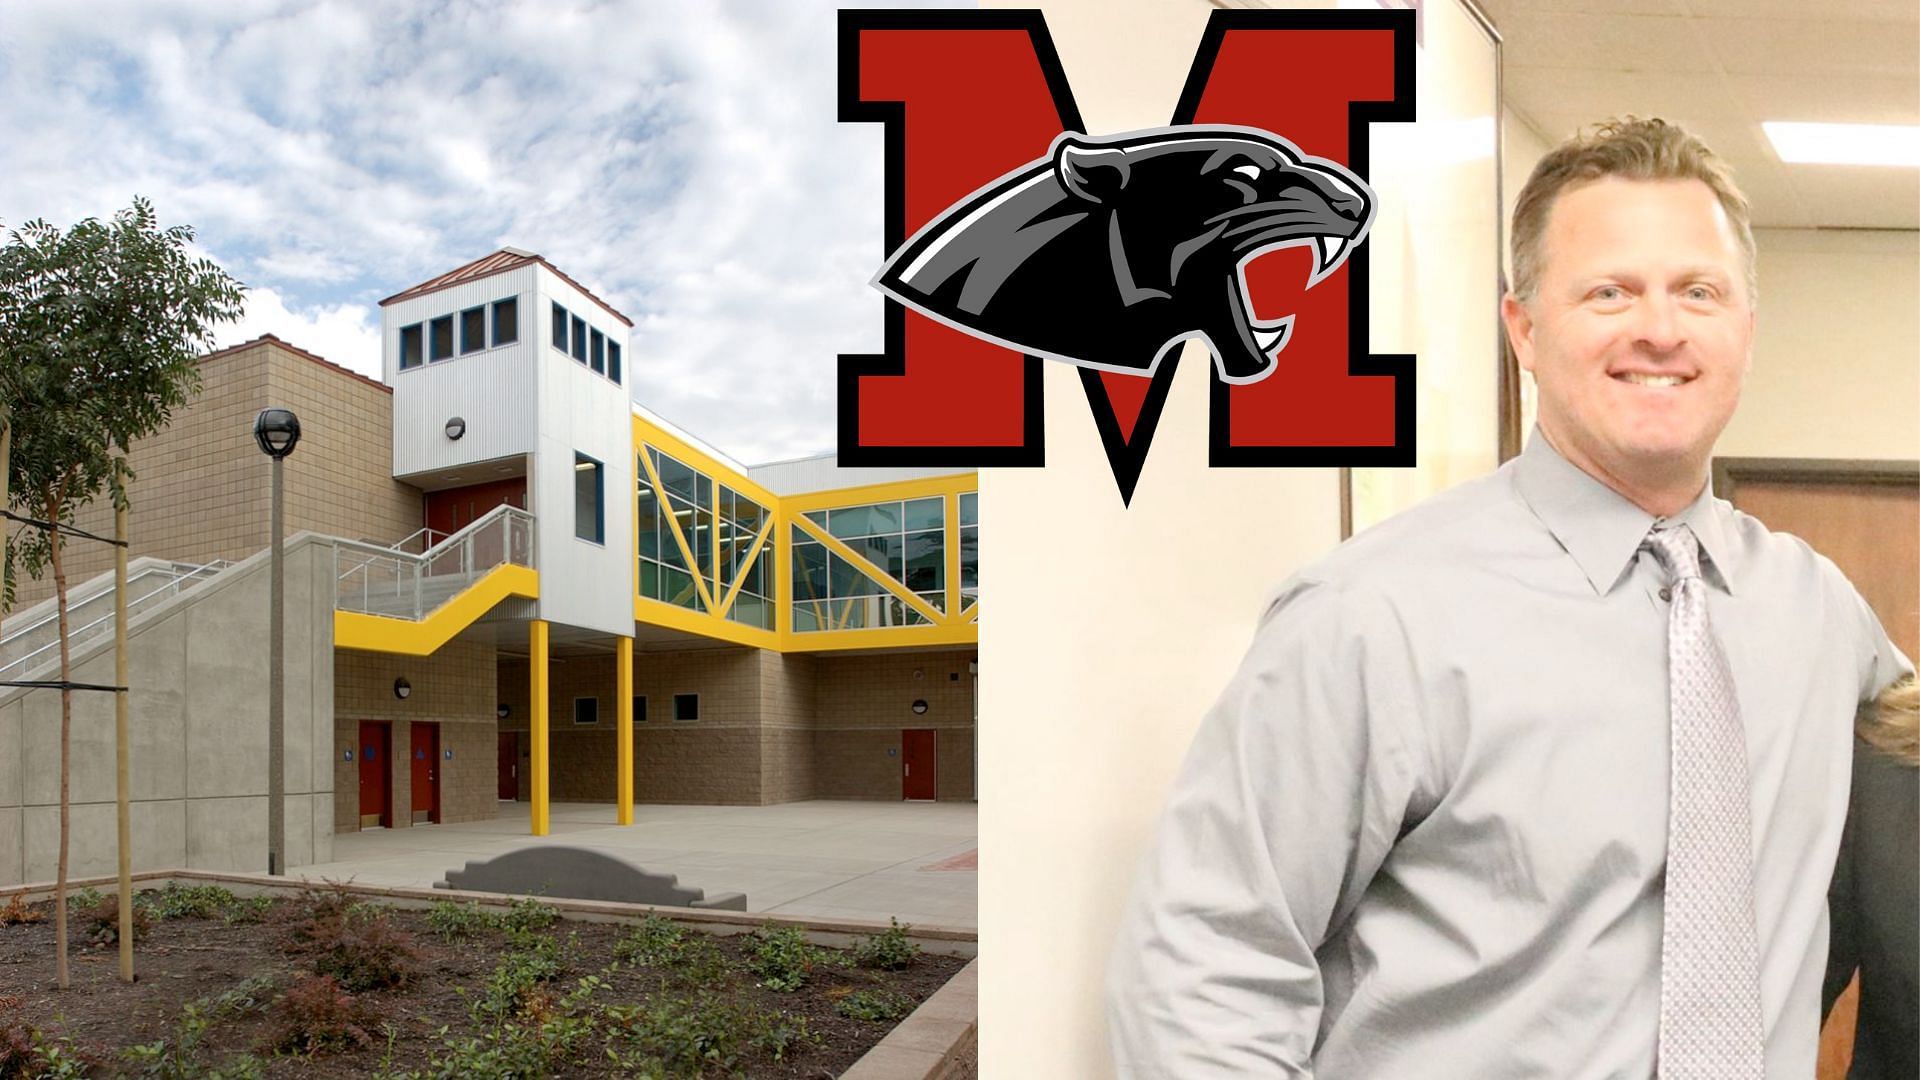 Modesto High School places principal and another staff member under paid admin leave on account of misconduct (image via Facebook/Modesto City Schools and mhs.com)